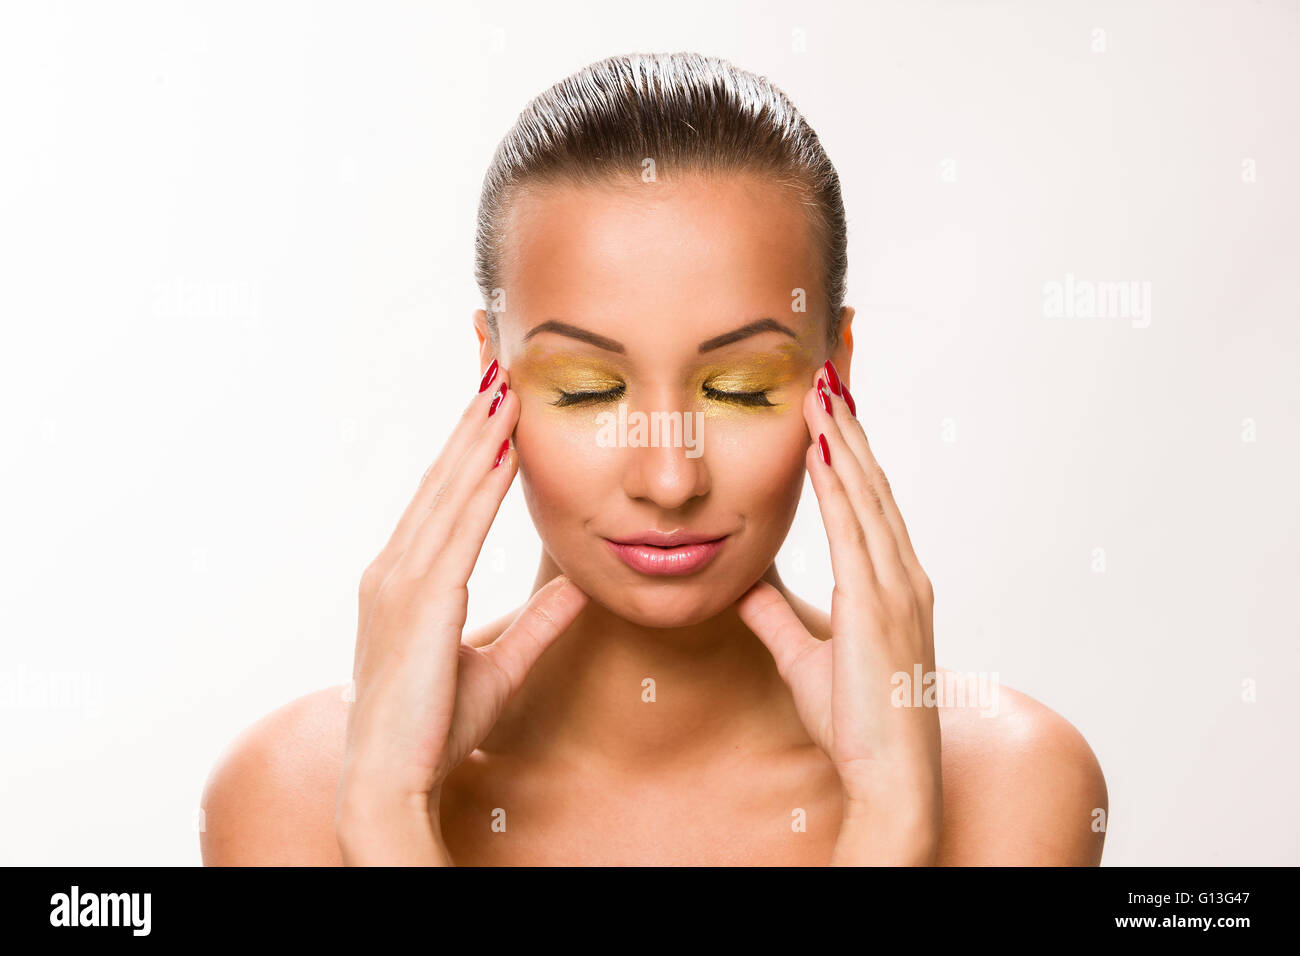 Gold make up. Brown sleek hair beautiful woman with hands on temples. Stock Photo